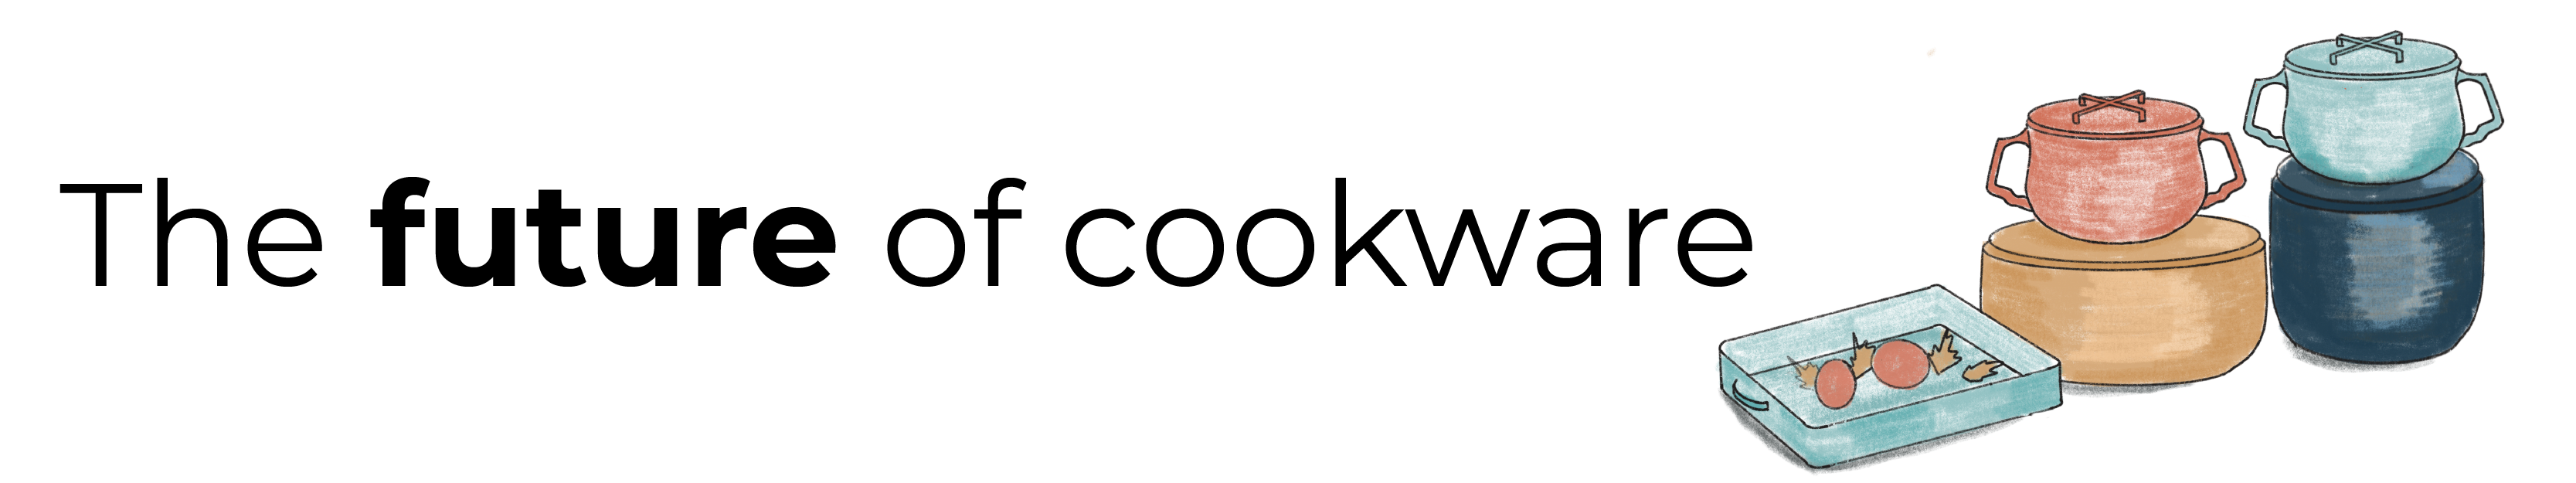 future of cookware